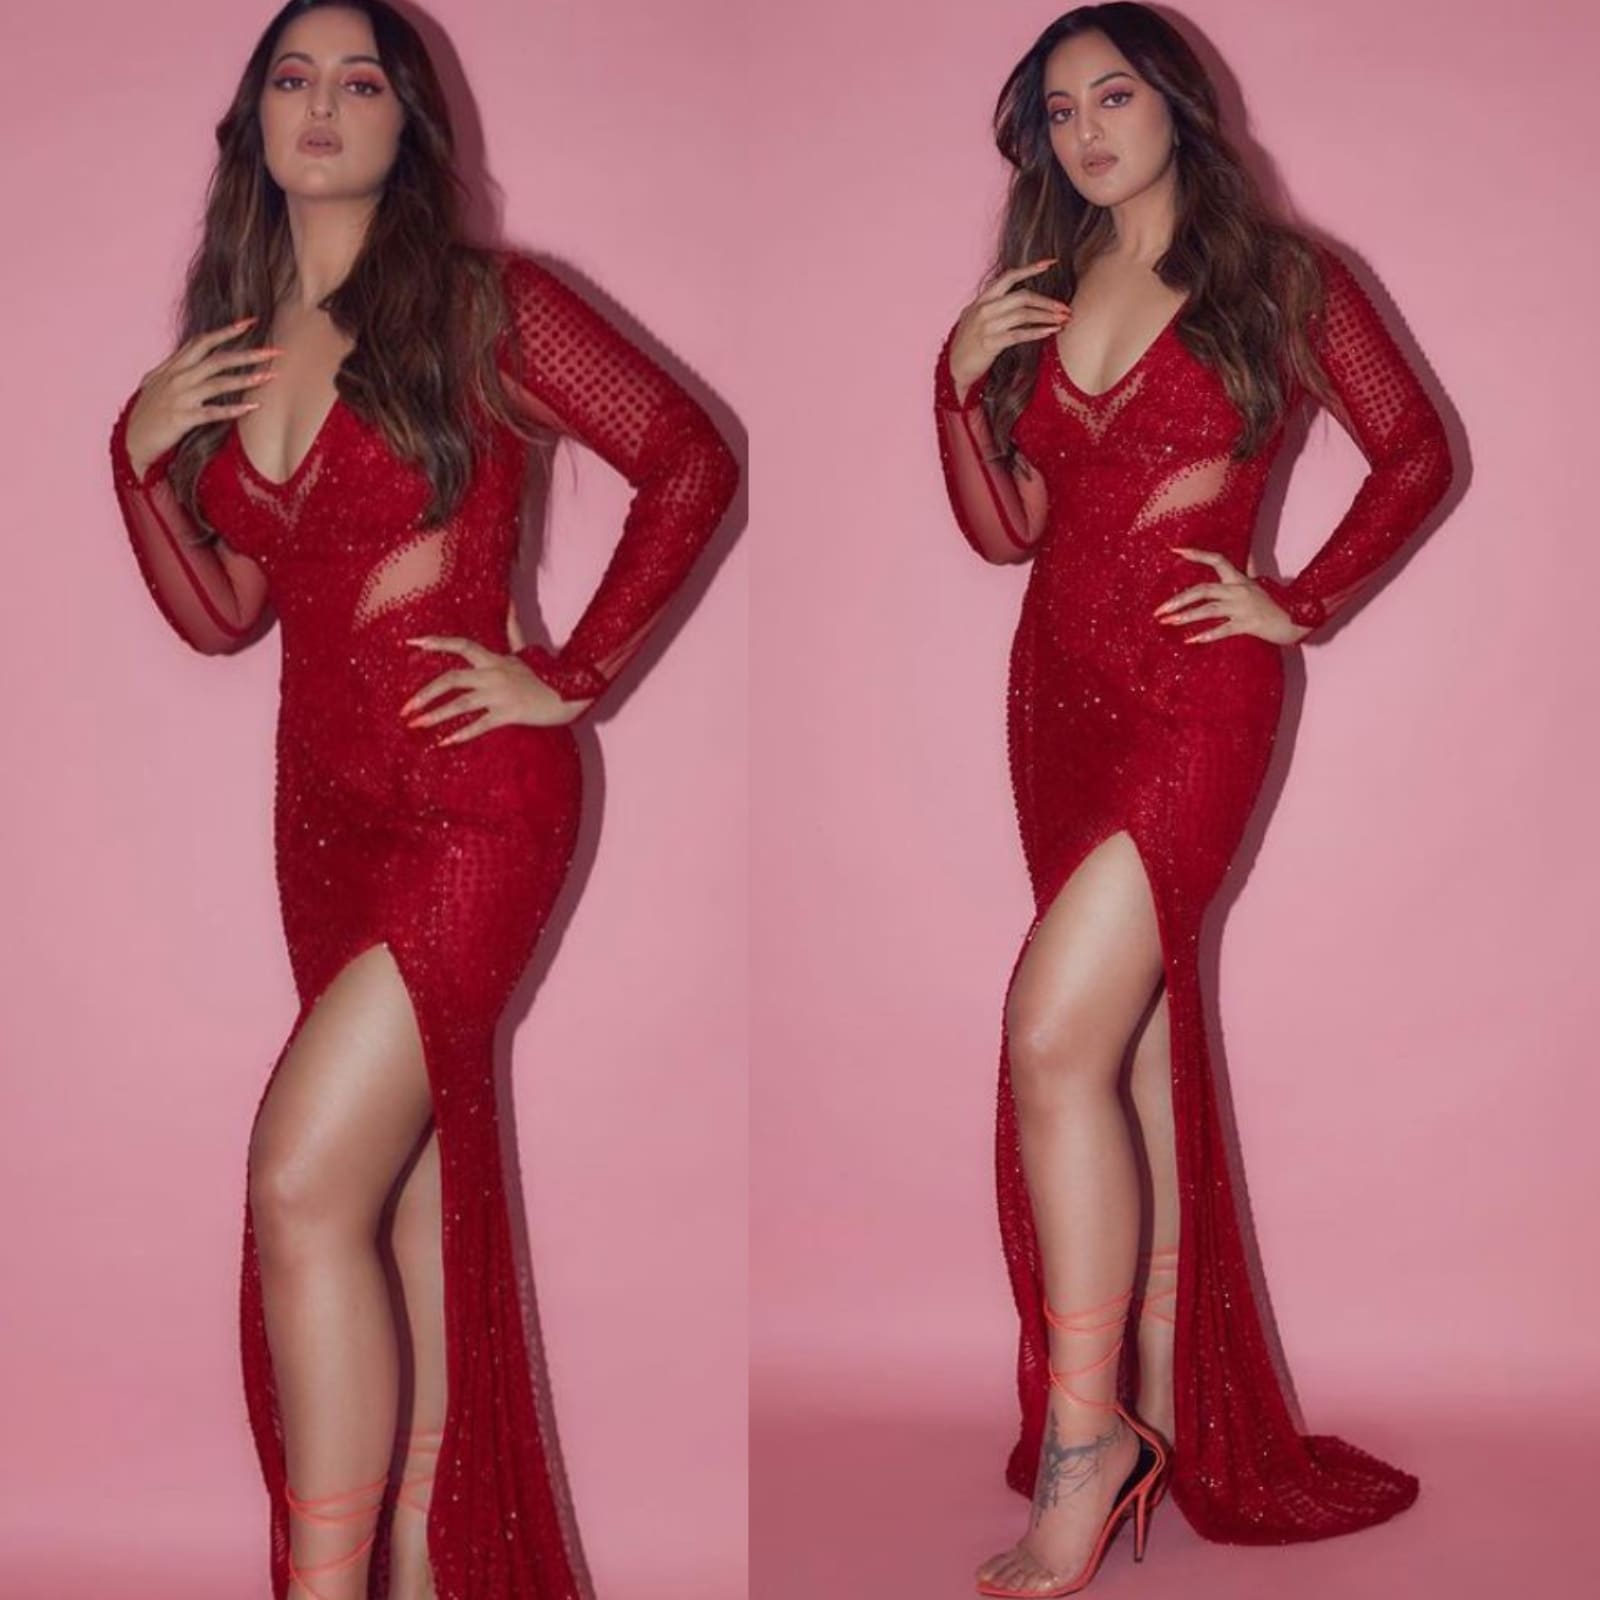 Sonakshi Sinha Xxxhd - Sonakshi Sinha Raises The Glam Quotient In A Red Thigh-High Slit Dress -  News18